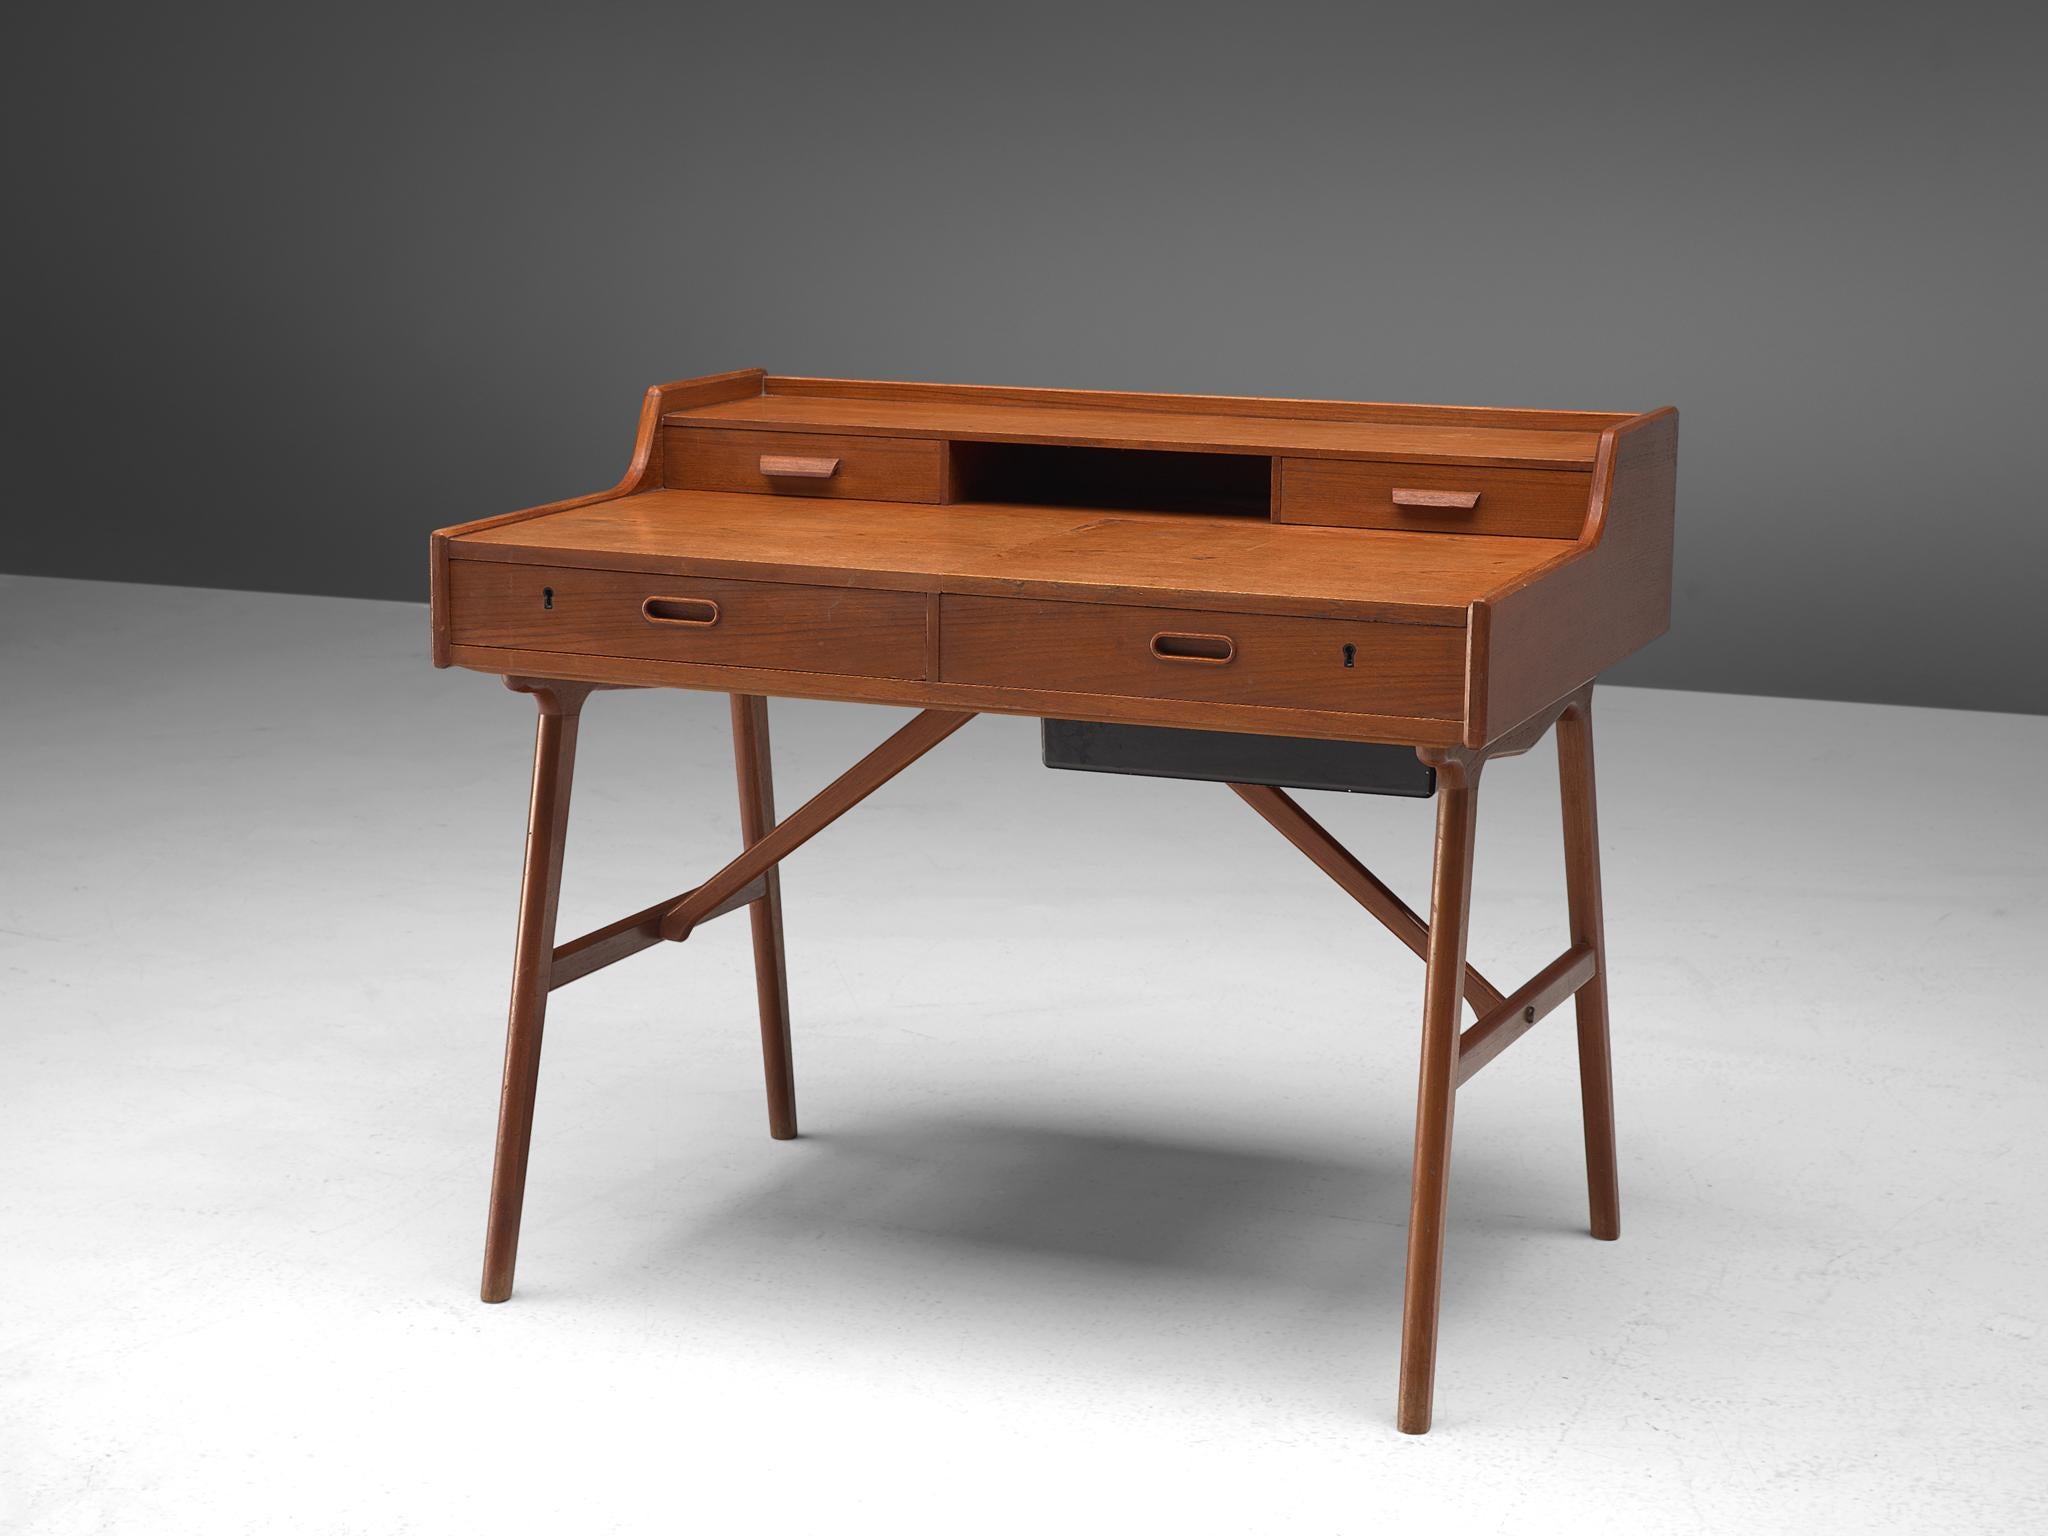 Arne Wahl Iversen for Vinde Møbelfabrik, desk model 65, teak, Denmark, circa 1961.

Refined vanity table by Danish designer Arne Wahl Iversen. This small writing table has a beautiful open look due the high cylindrical legs. The table with two